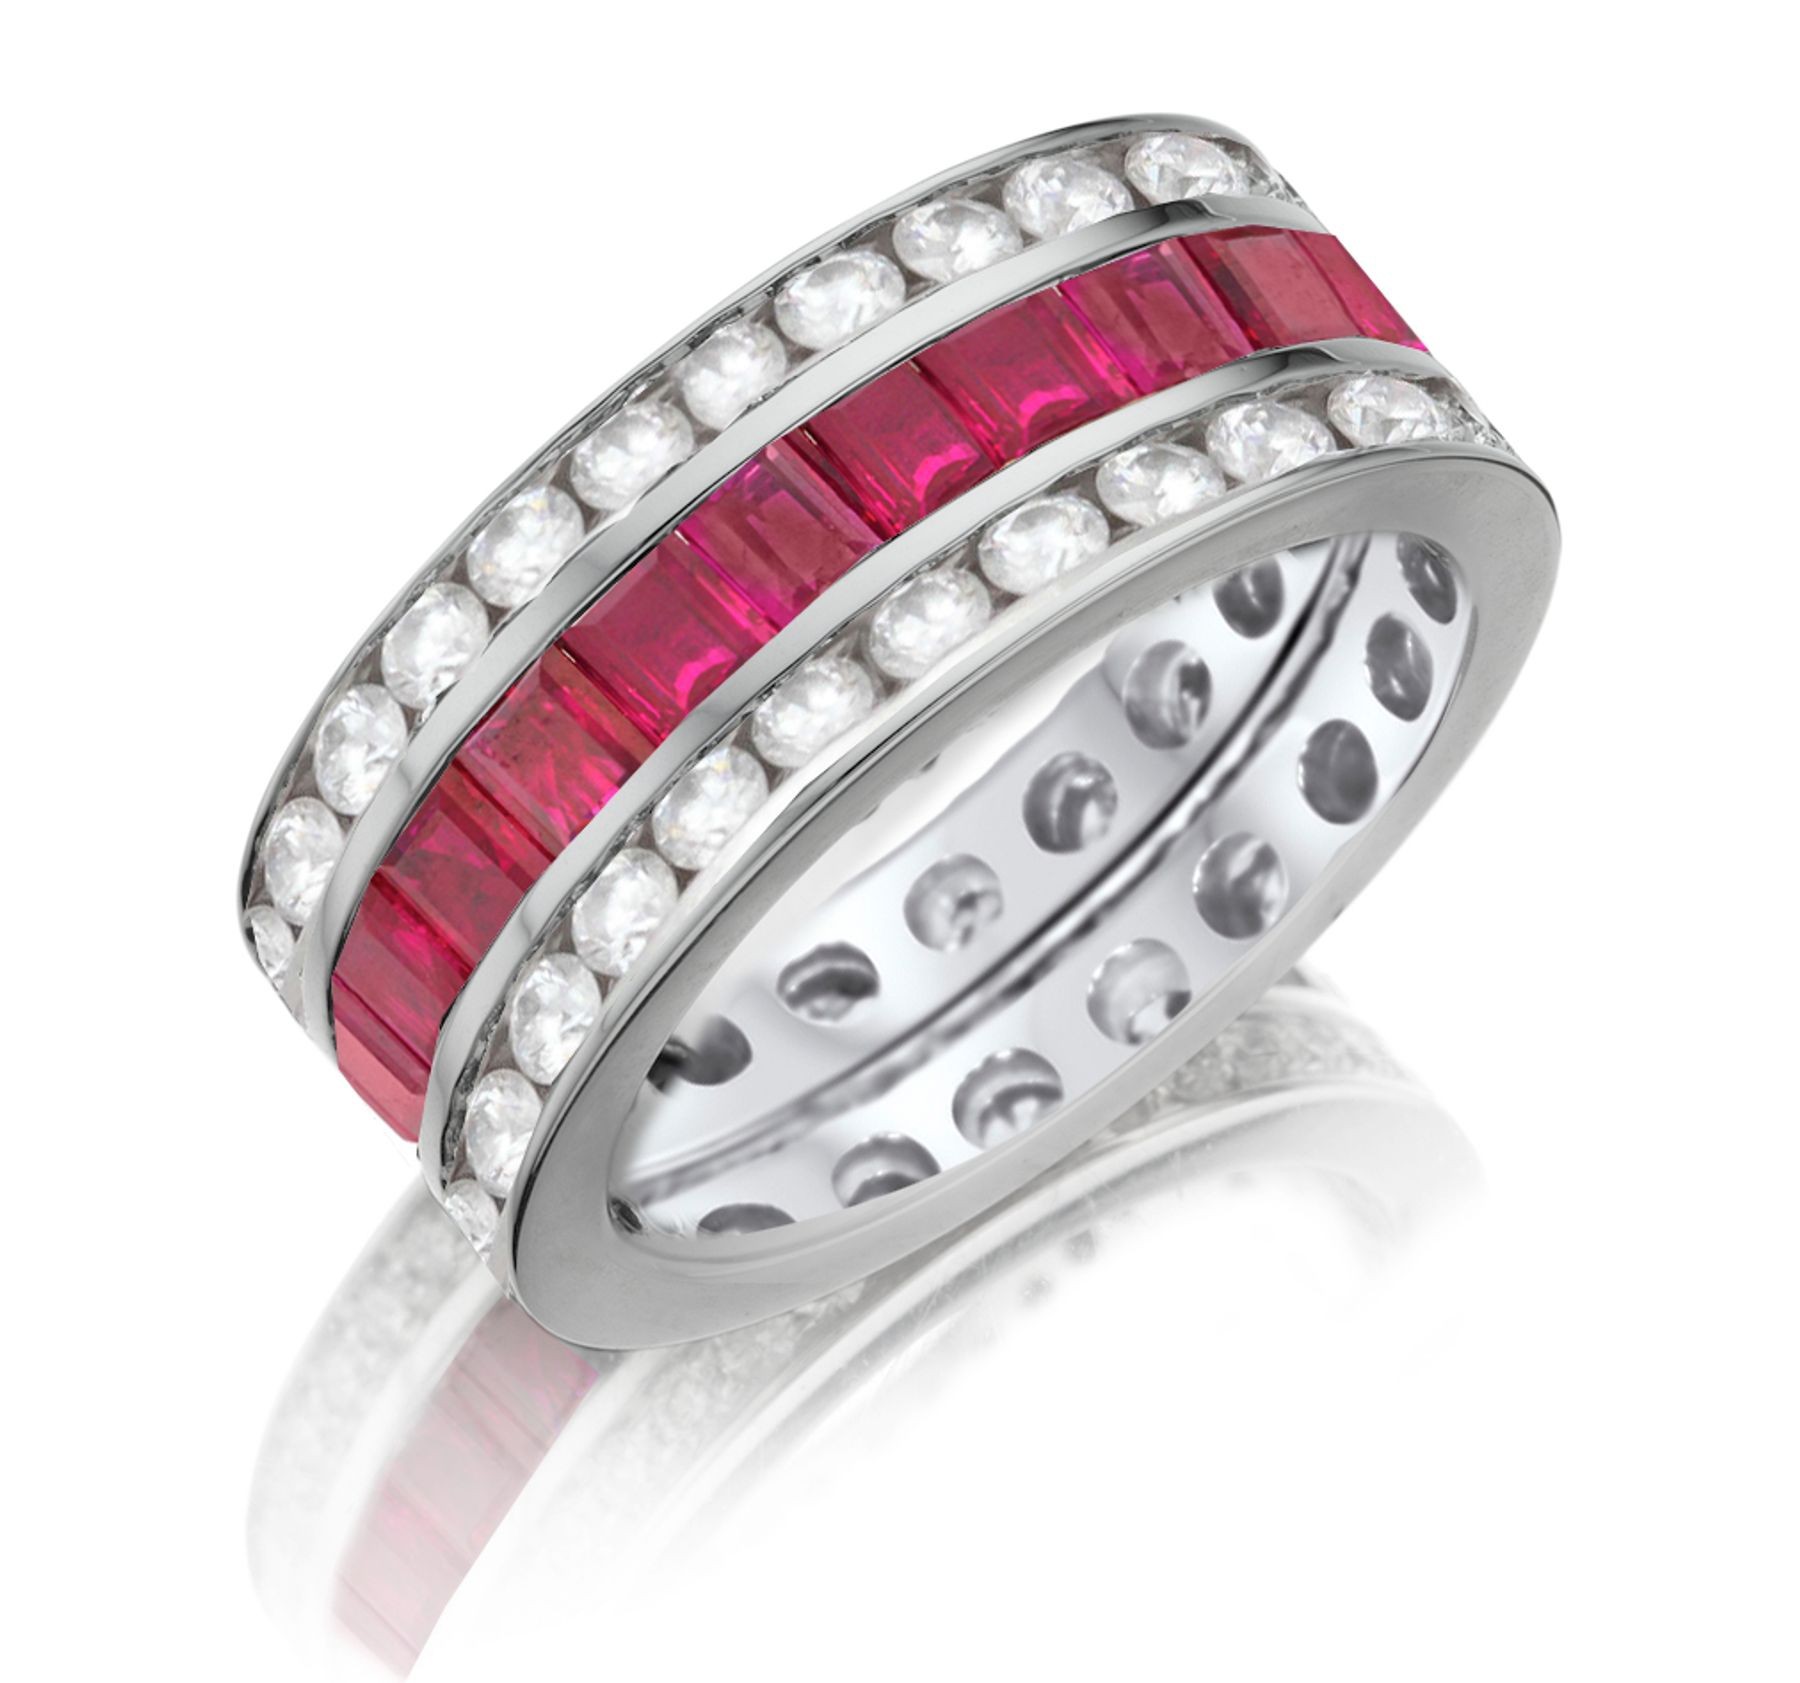 Made To Order Just For You Round & Emerald Cut Ruby & Diamond Prong Set Eternity Wedding Band Rings